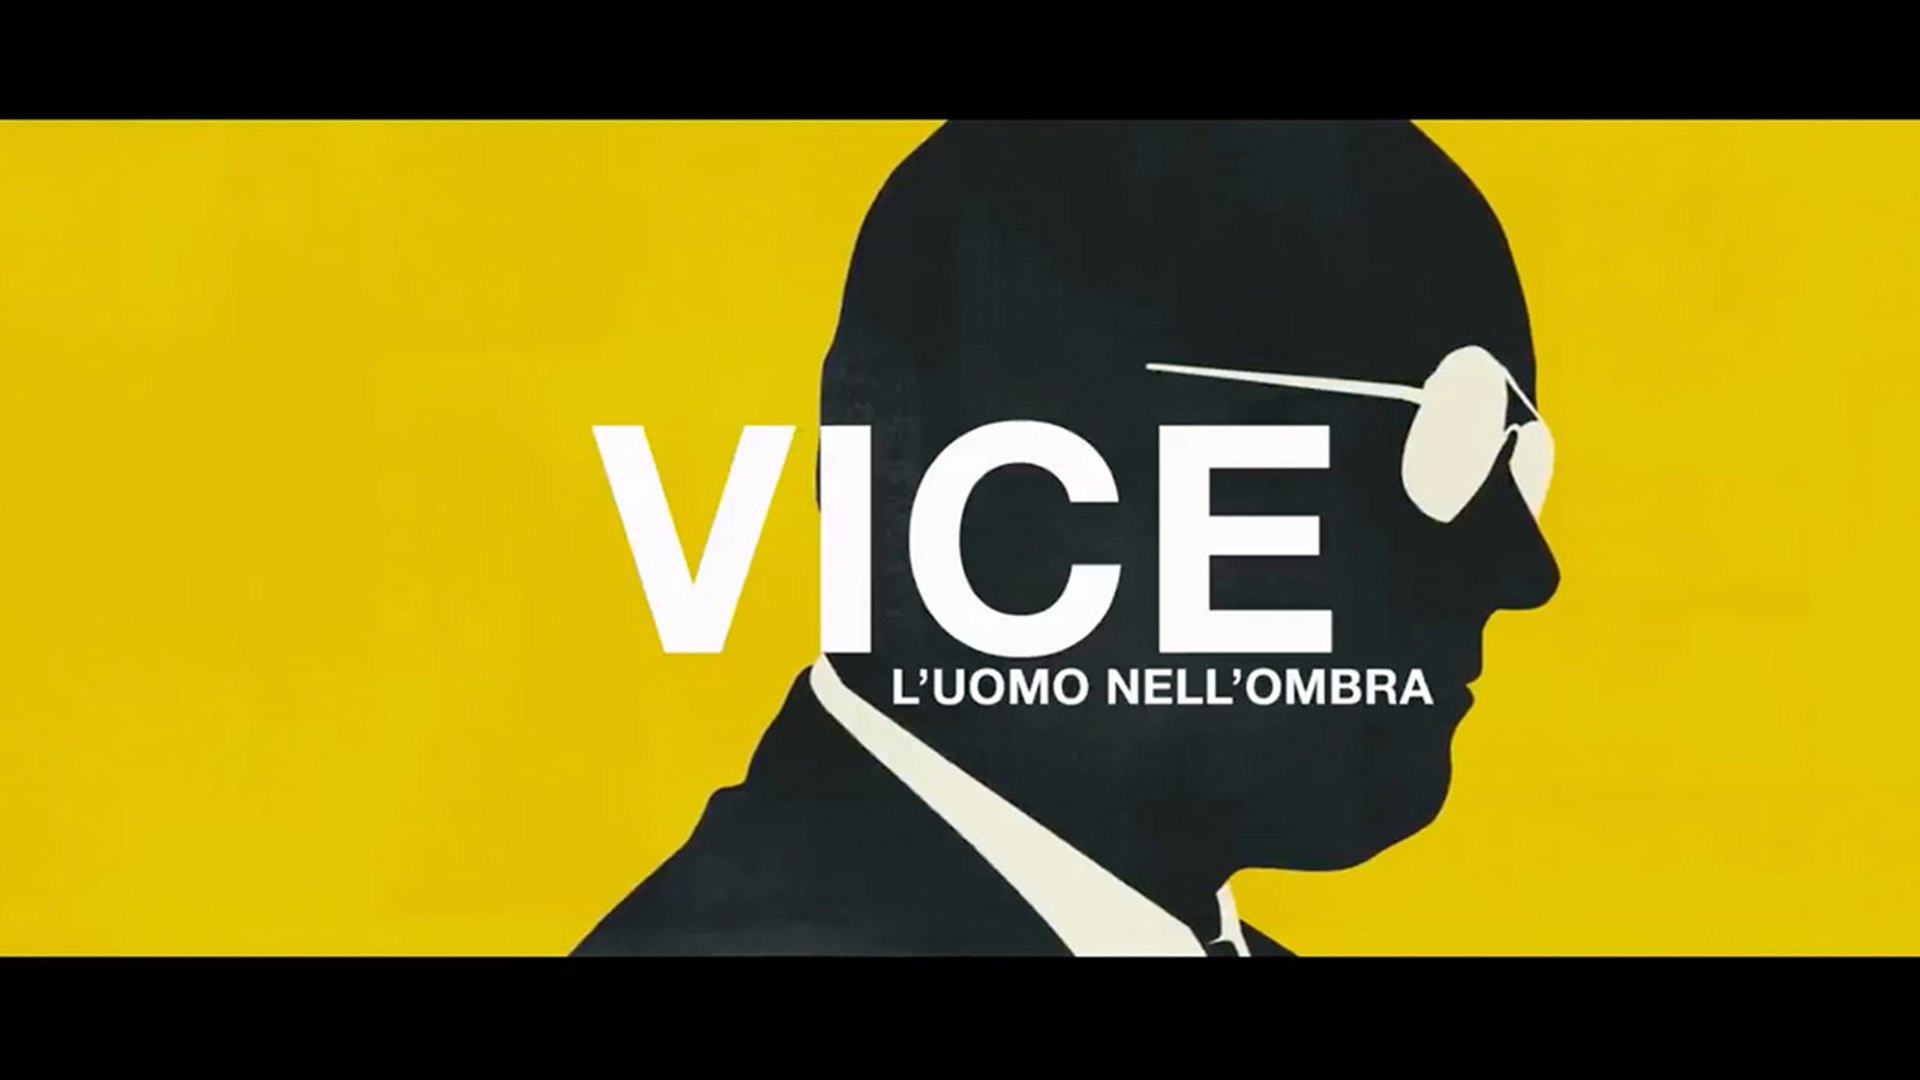 VICE - L'UOMO NELL'OMBRA (2018) HD rip 720p - Video Dailymotion